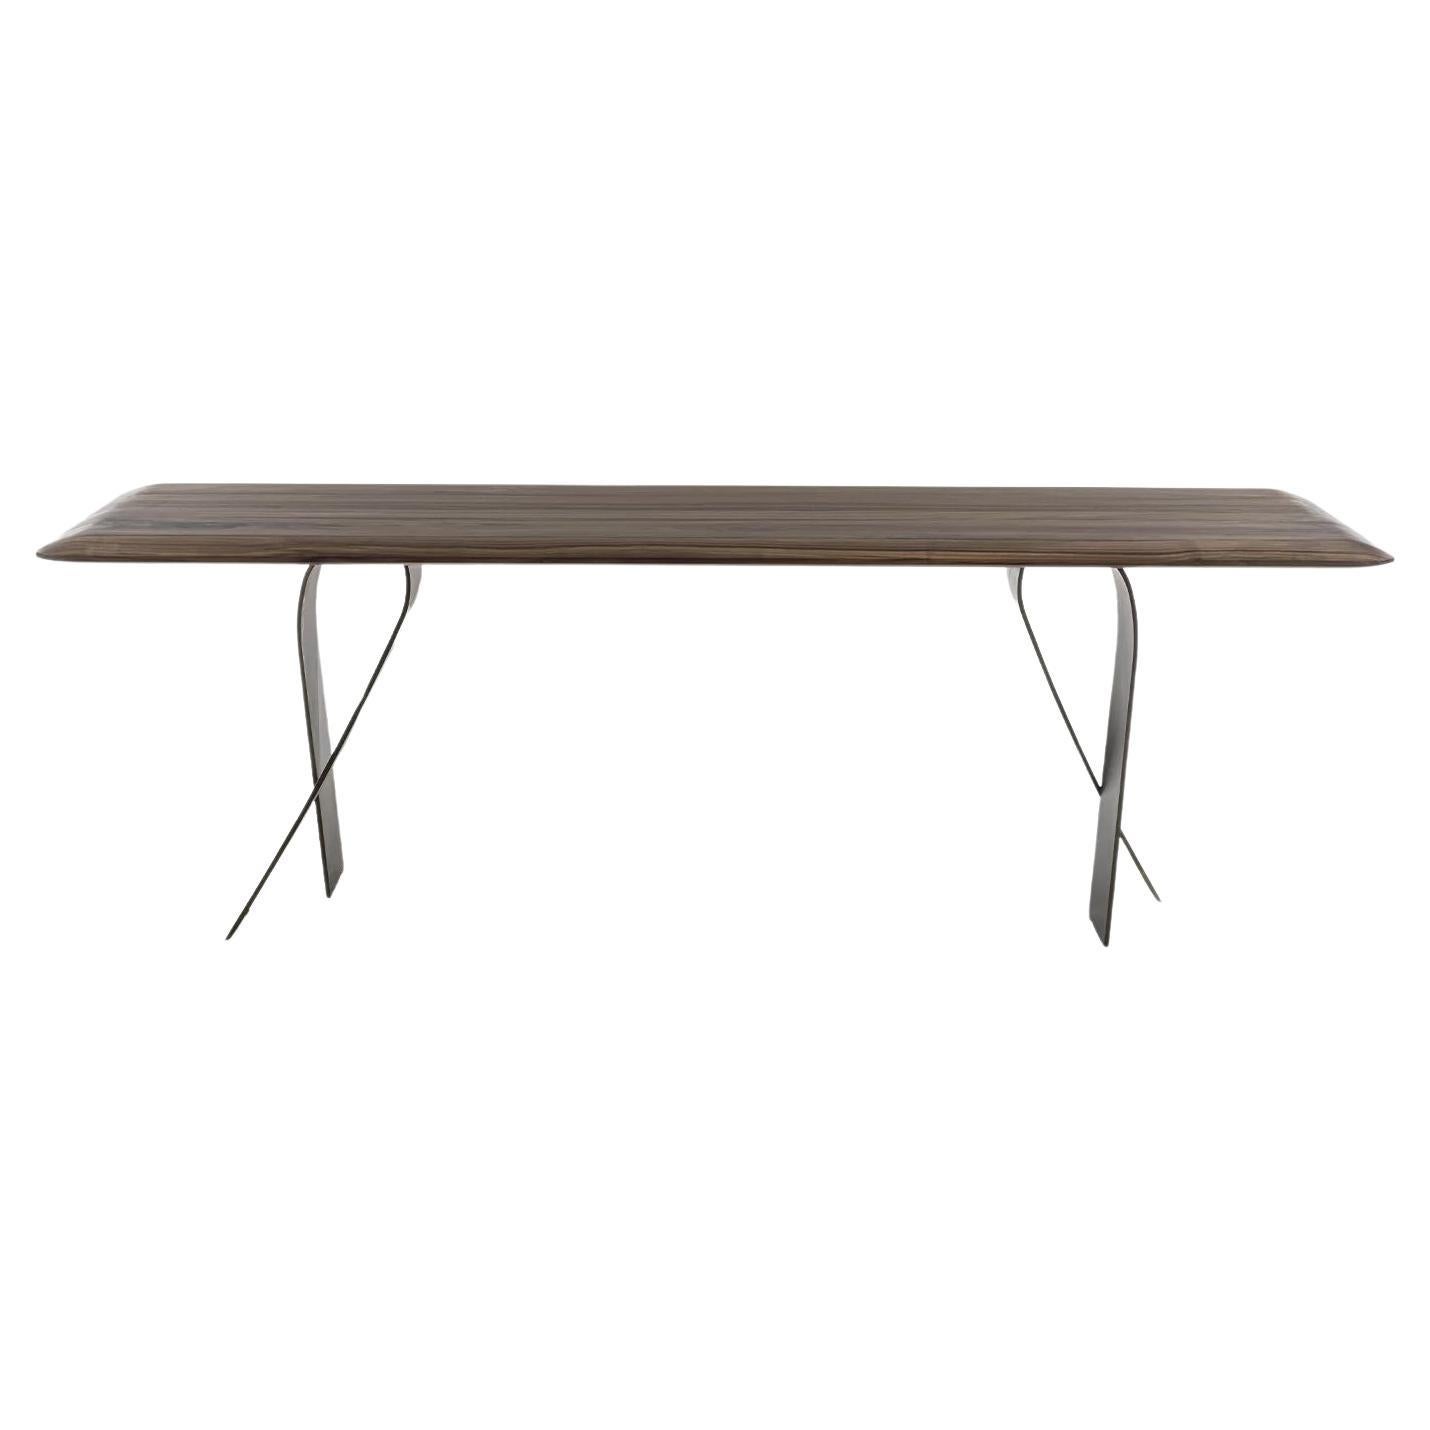 Nastro Wood & Iron Dining Table, Designed by Carlesi Tonelli, Made in Italy For Sale